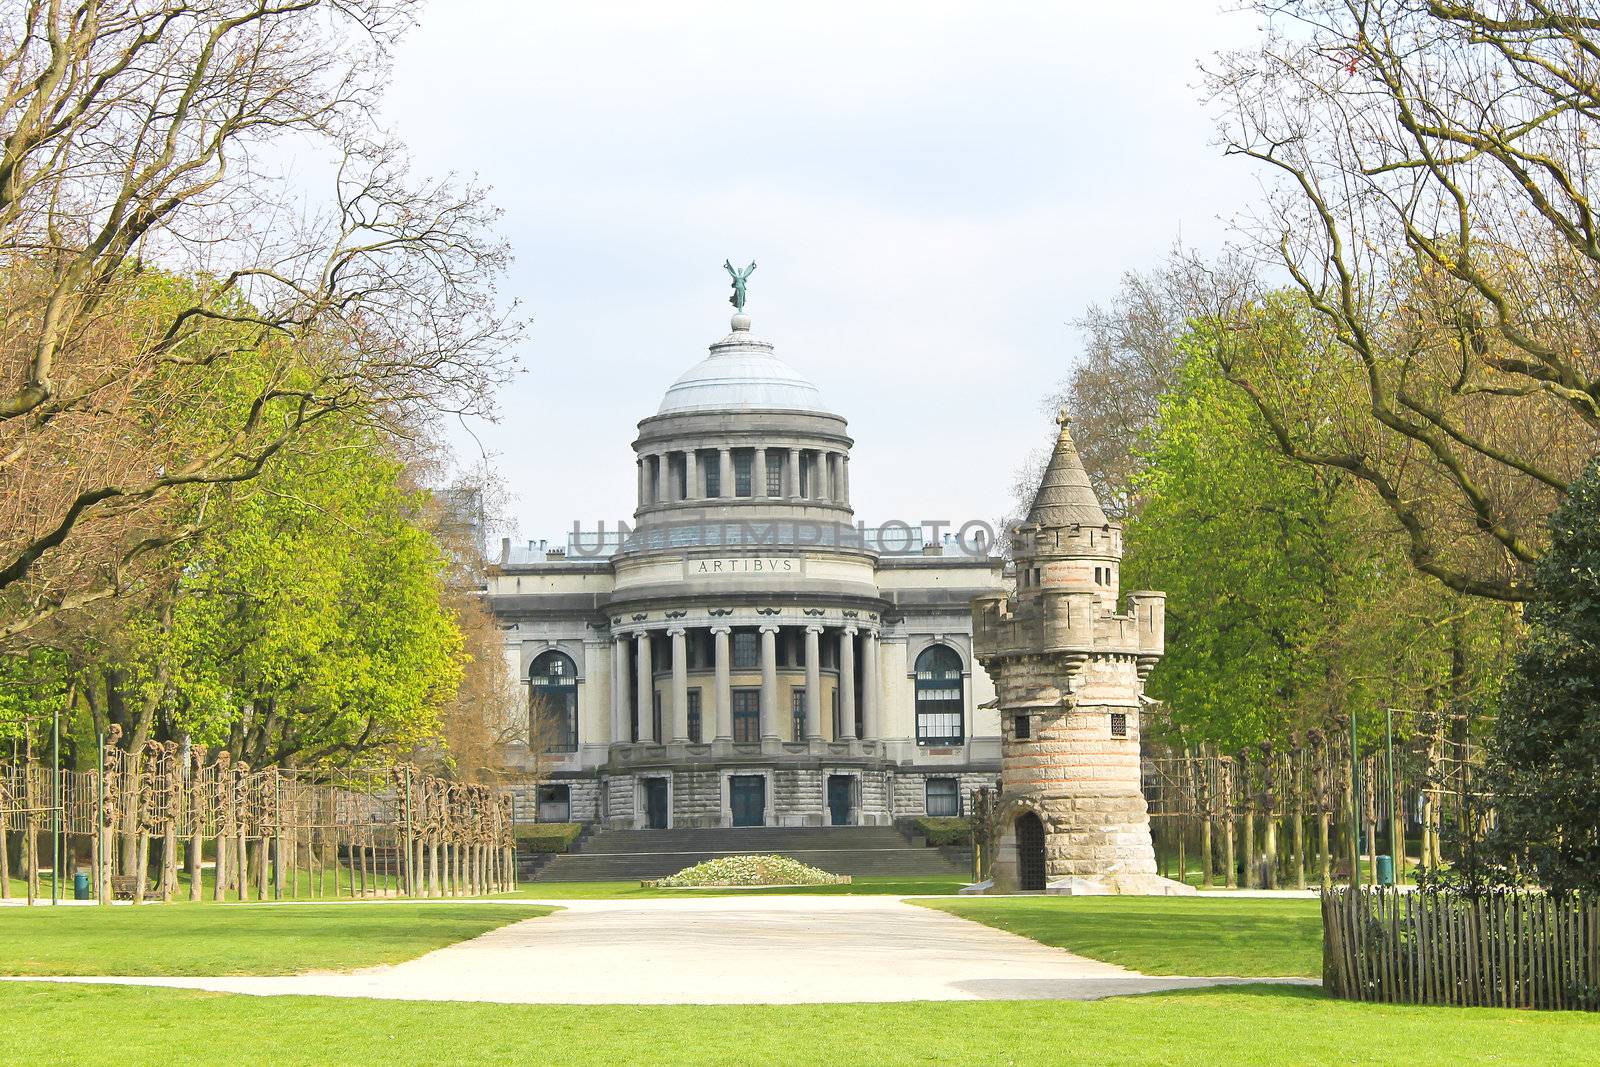 The fortress tower in a park in Brussels by NickNick